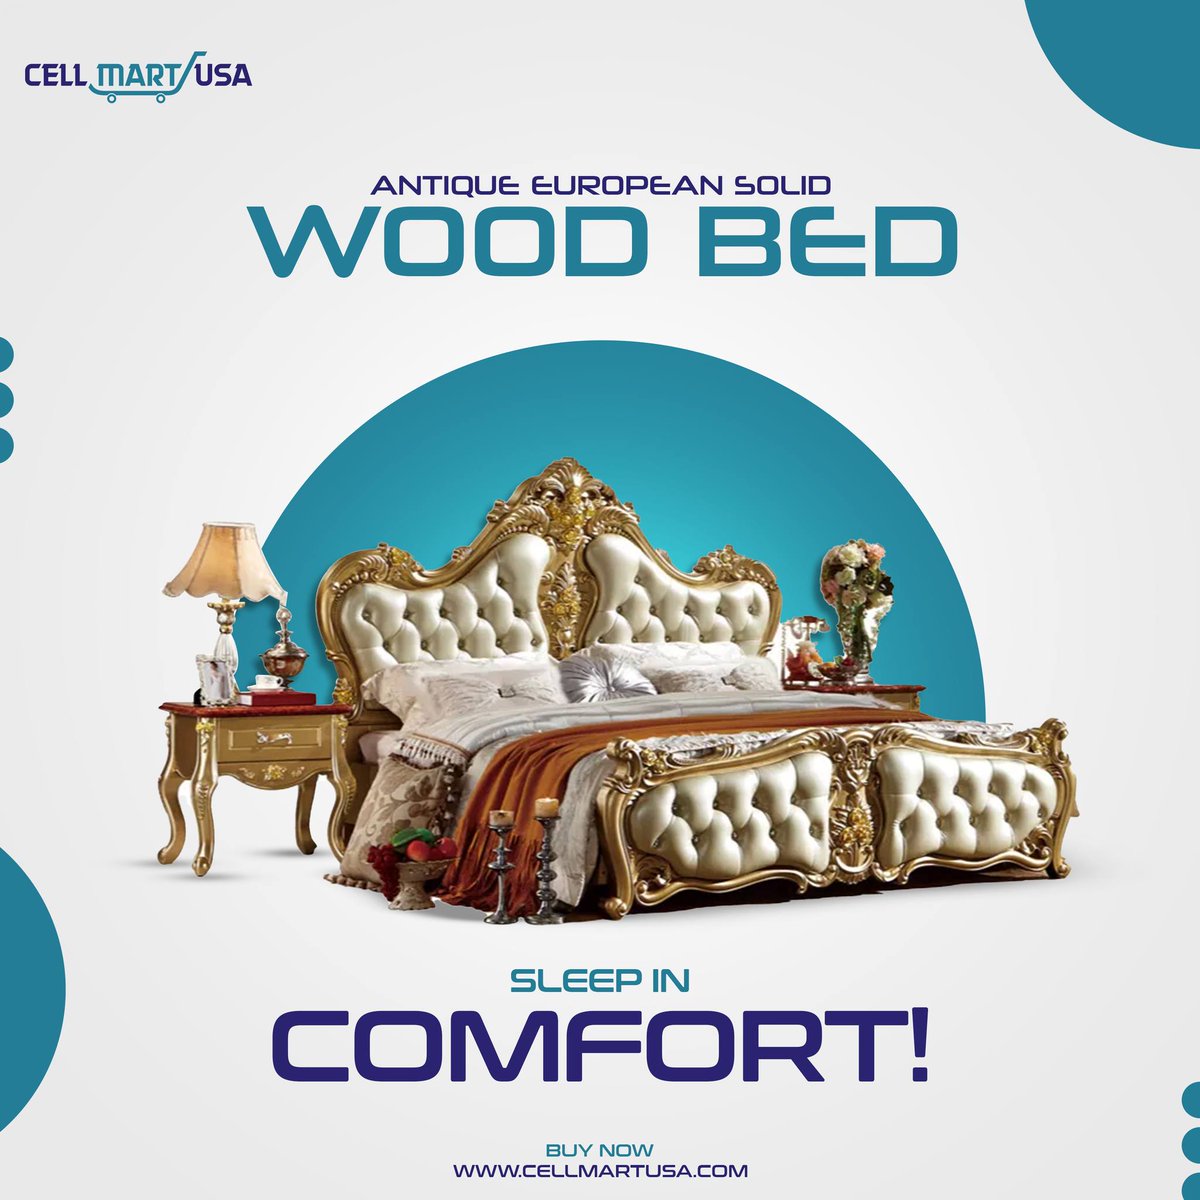 This bed is well-made and has a stylish design so it will get you proper rest every night.

#onlineshoppingusa #onlineshoppingsite #onlineshoppingaddict #clothingforsale #70offsale #apparelcollection #apparelandaccessories #cellmartusa #woodbed #comfortbed